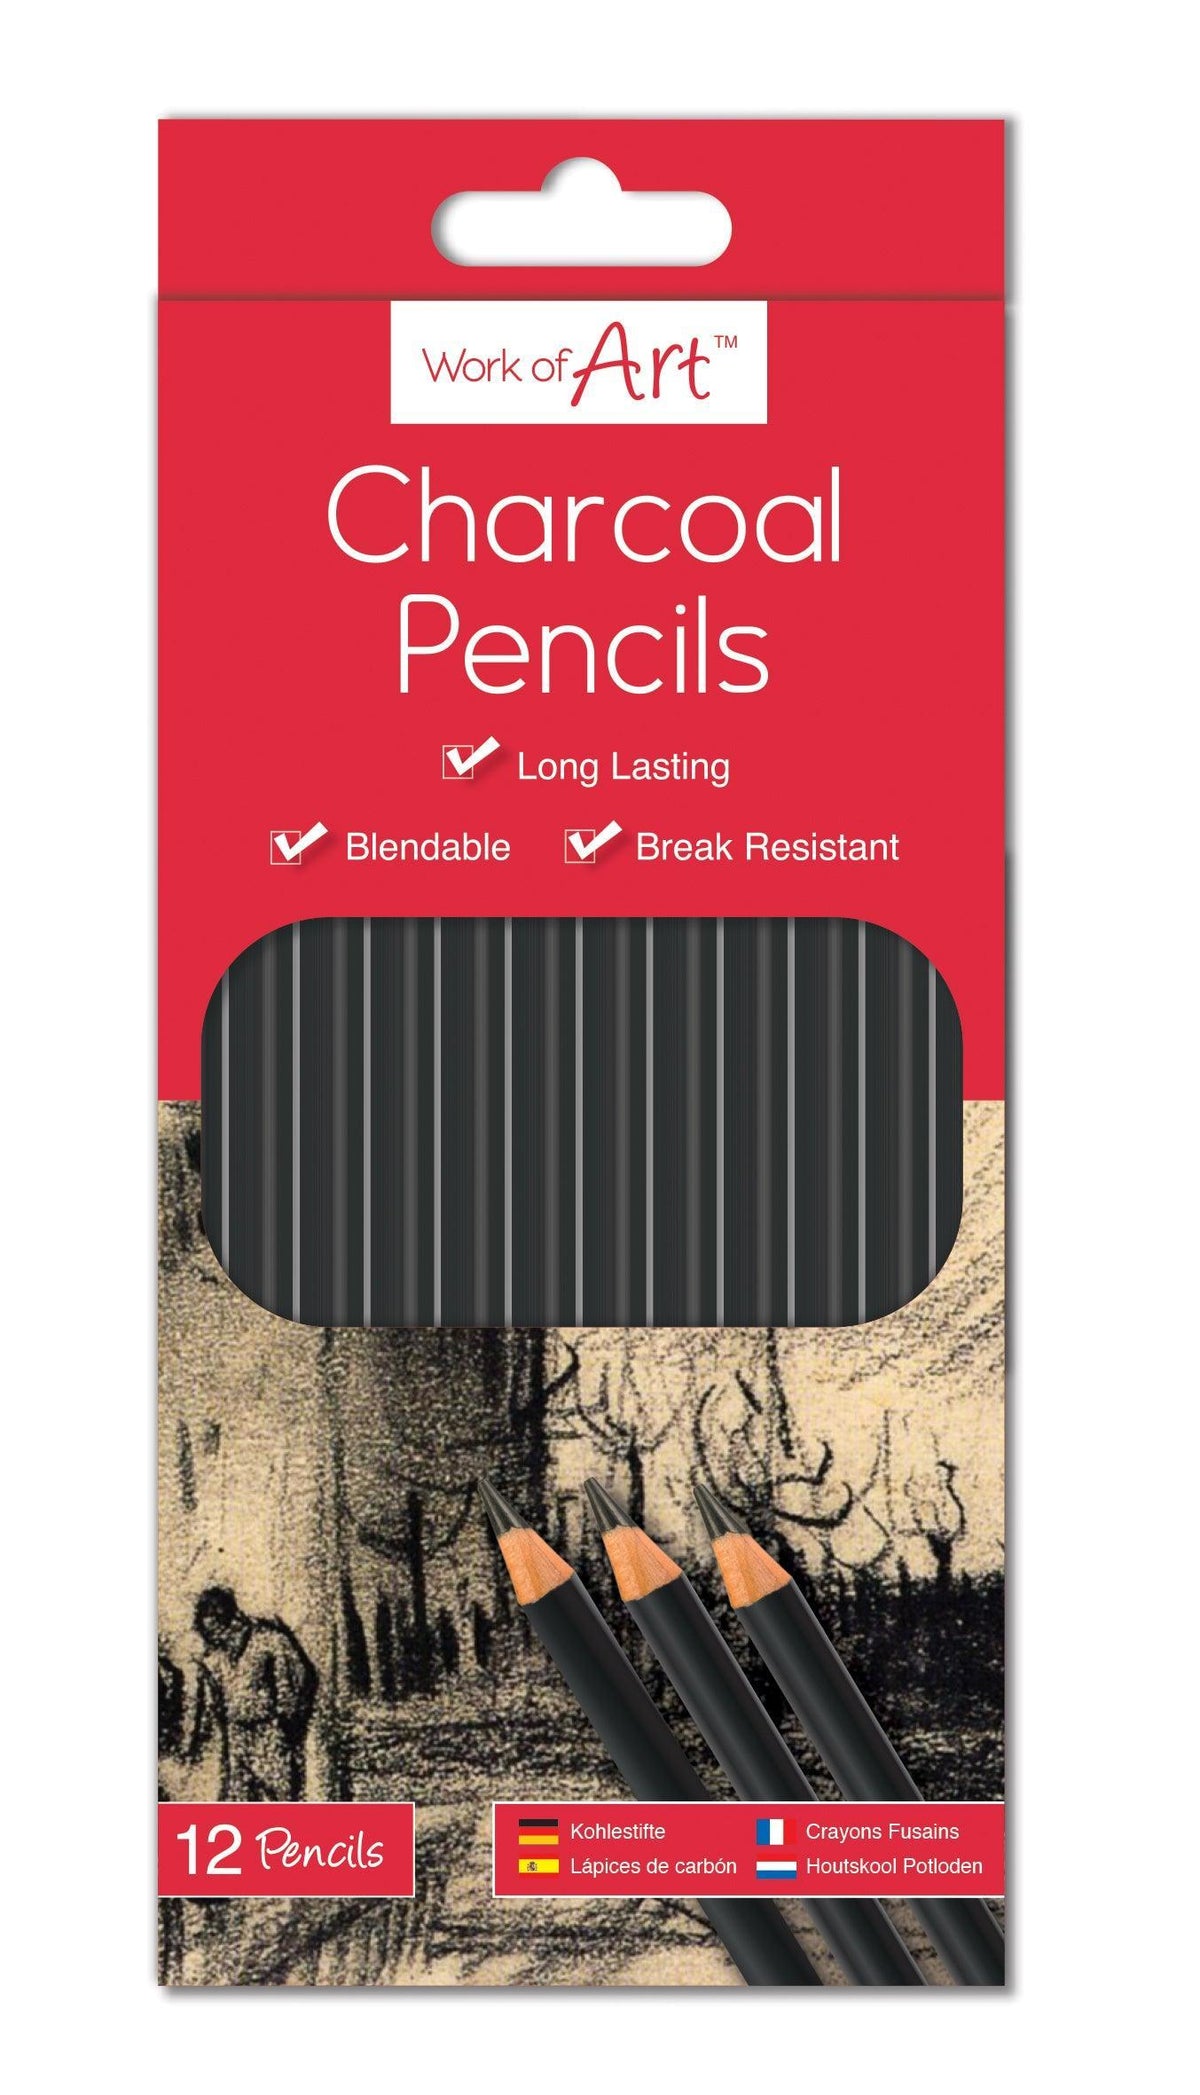 Work of Art Charcoal Pencils | 12 Pack - Choice Stores